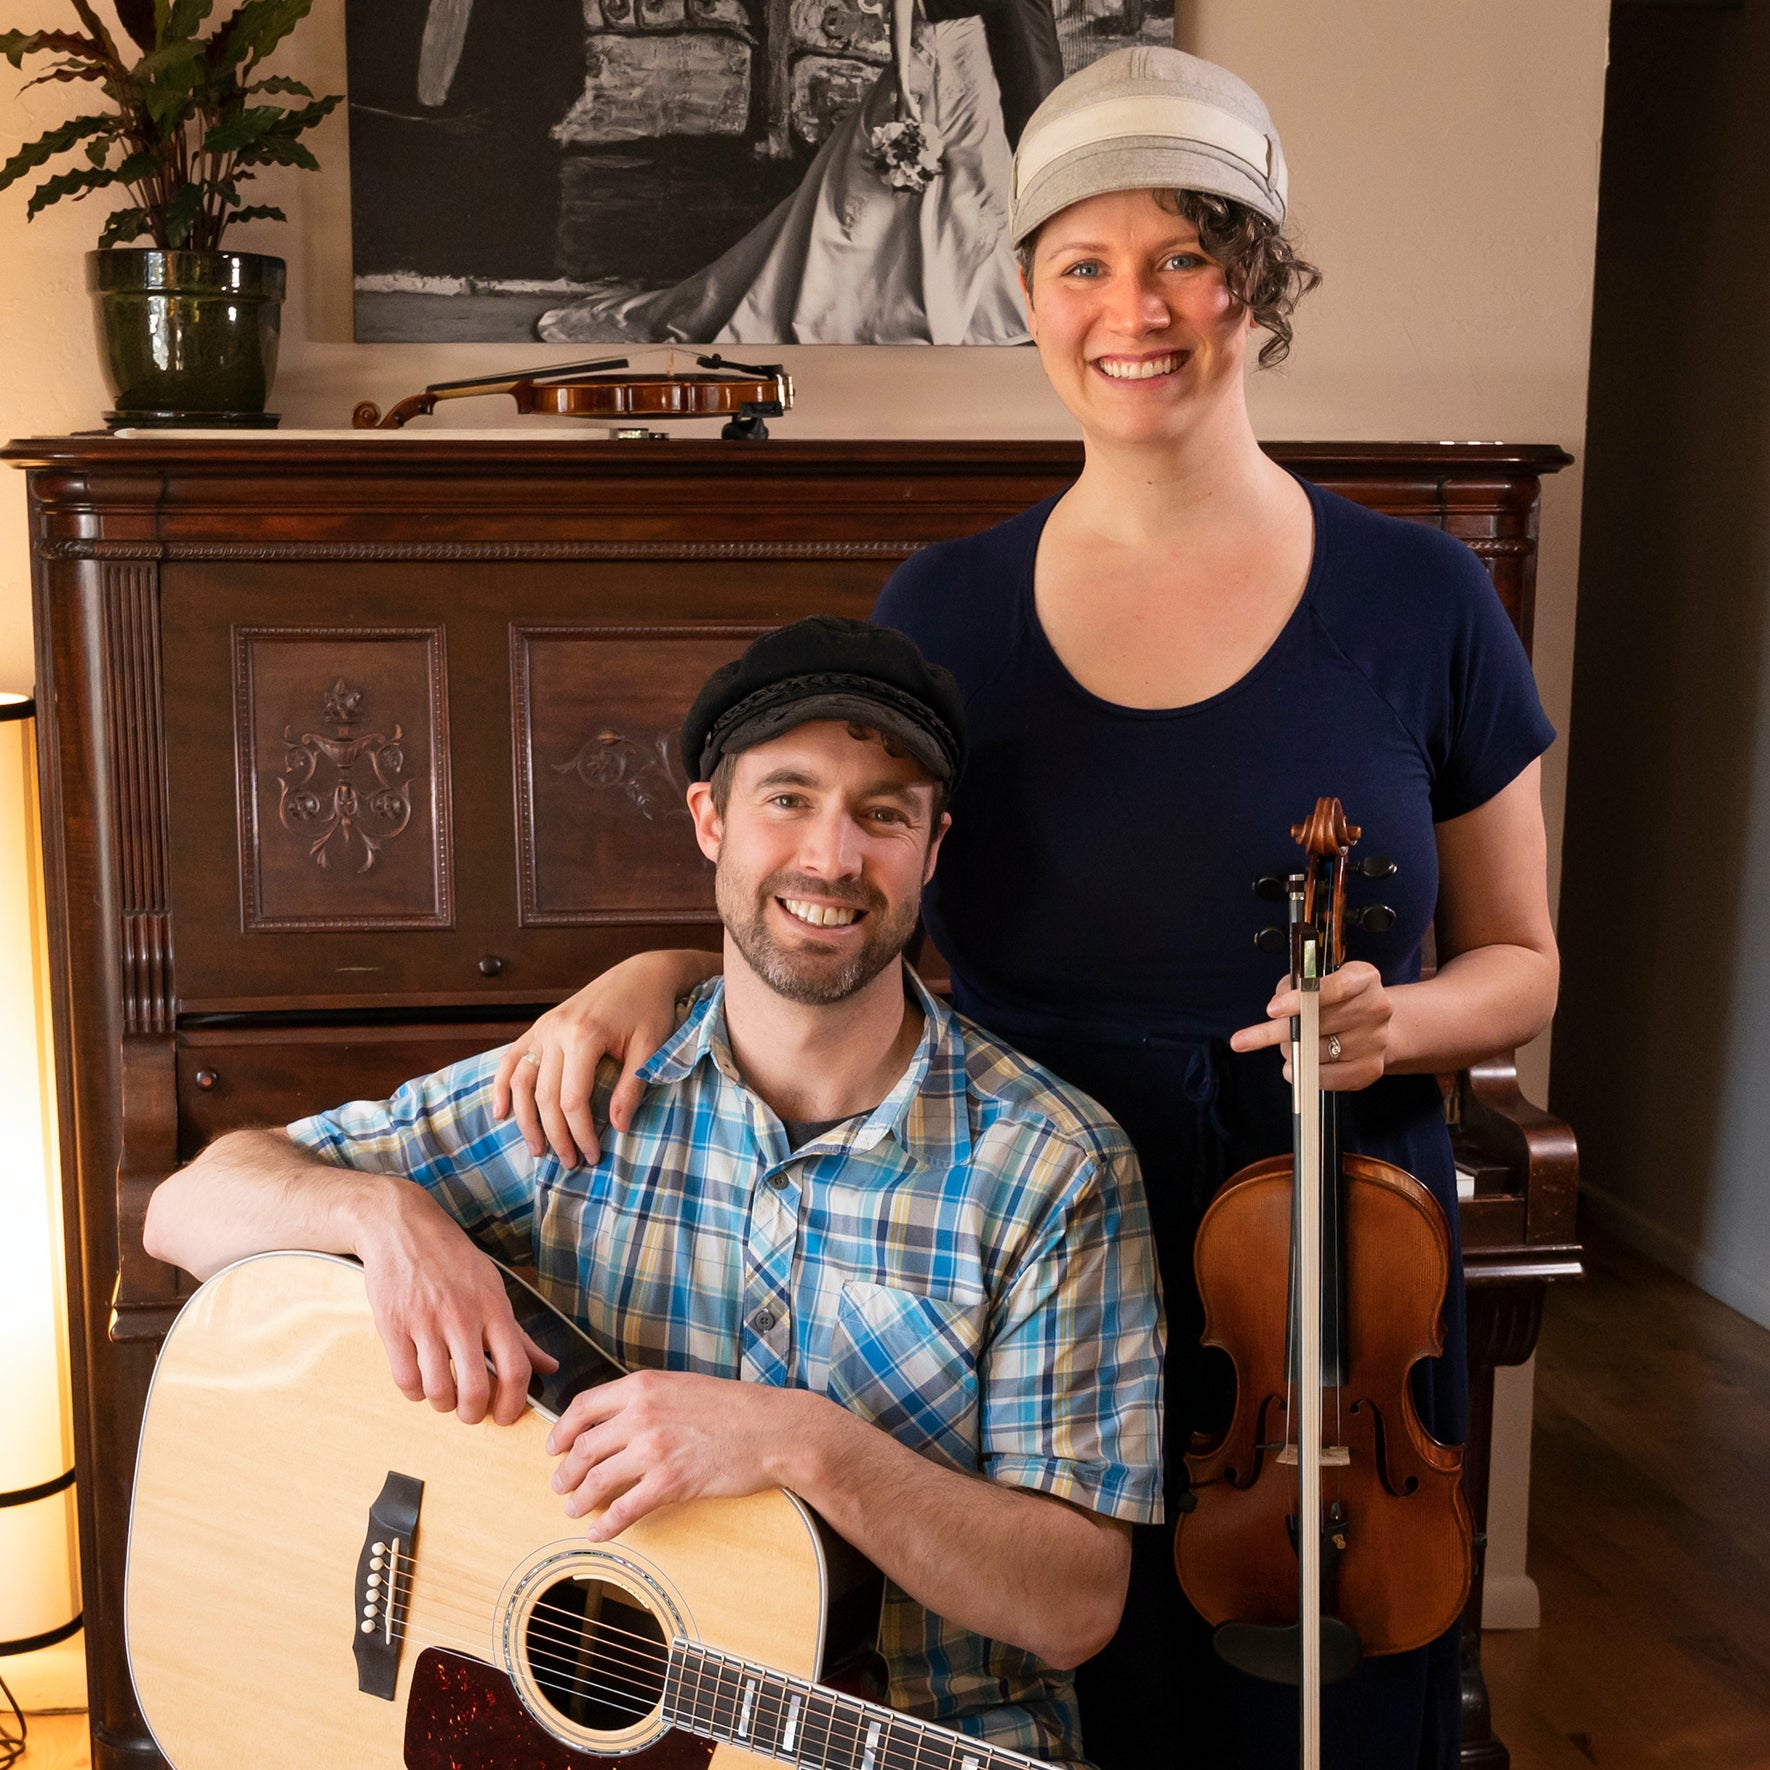 Boise Music Lessons owners Marcus and Angie Marianthi